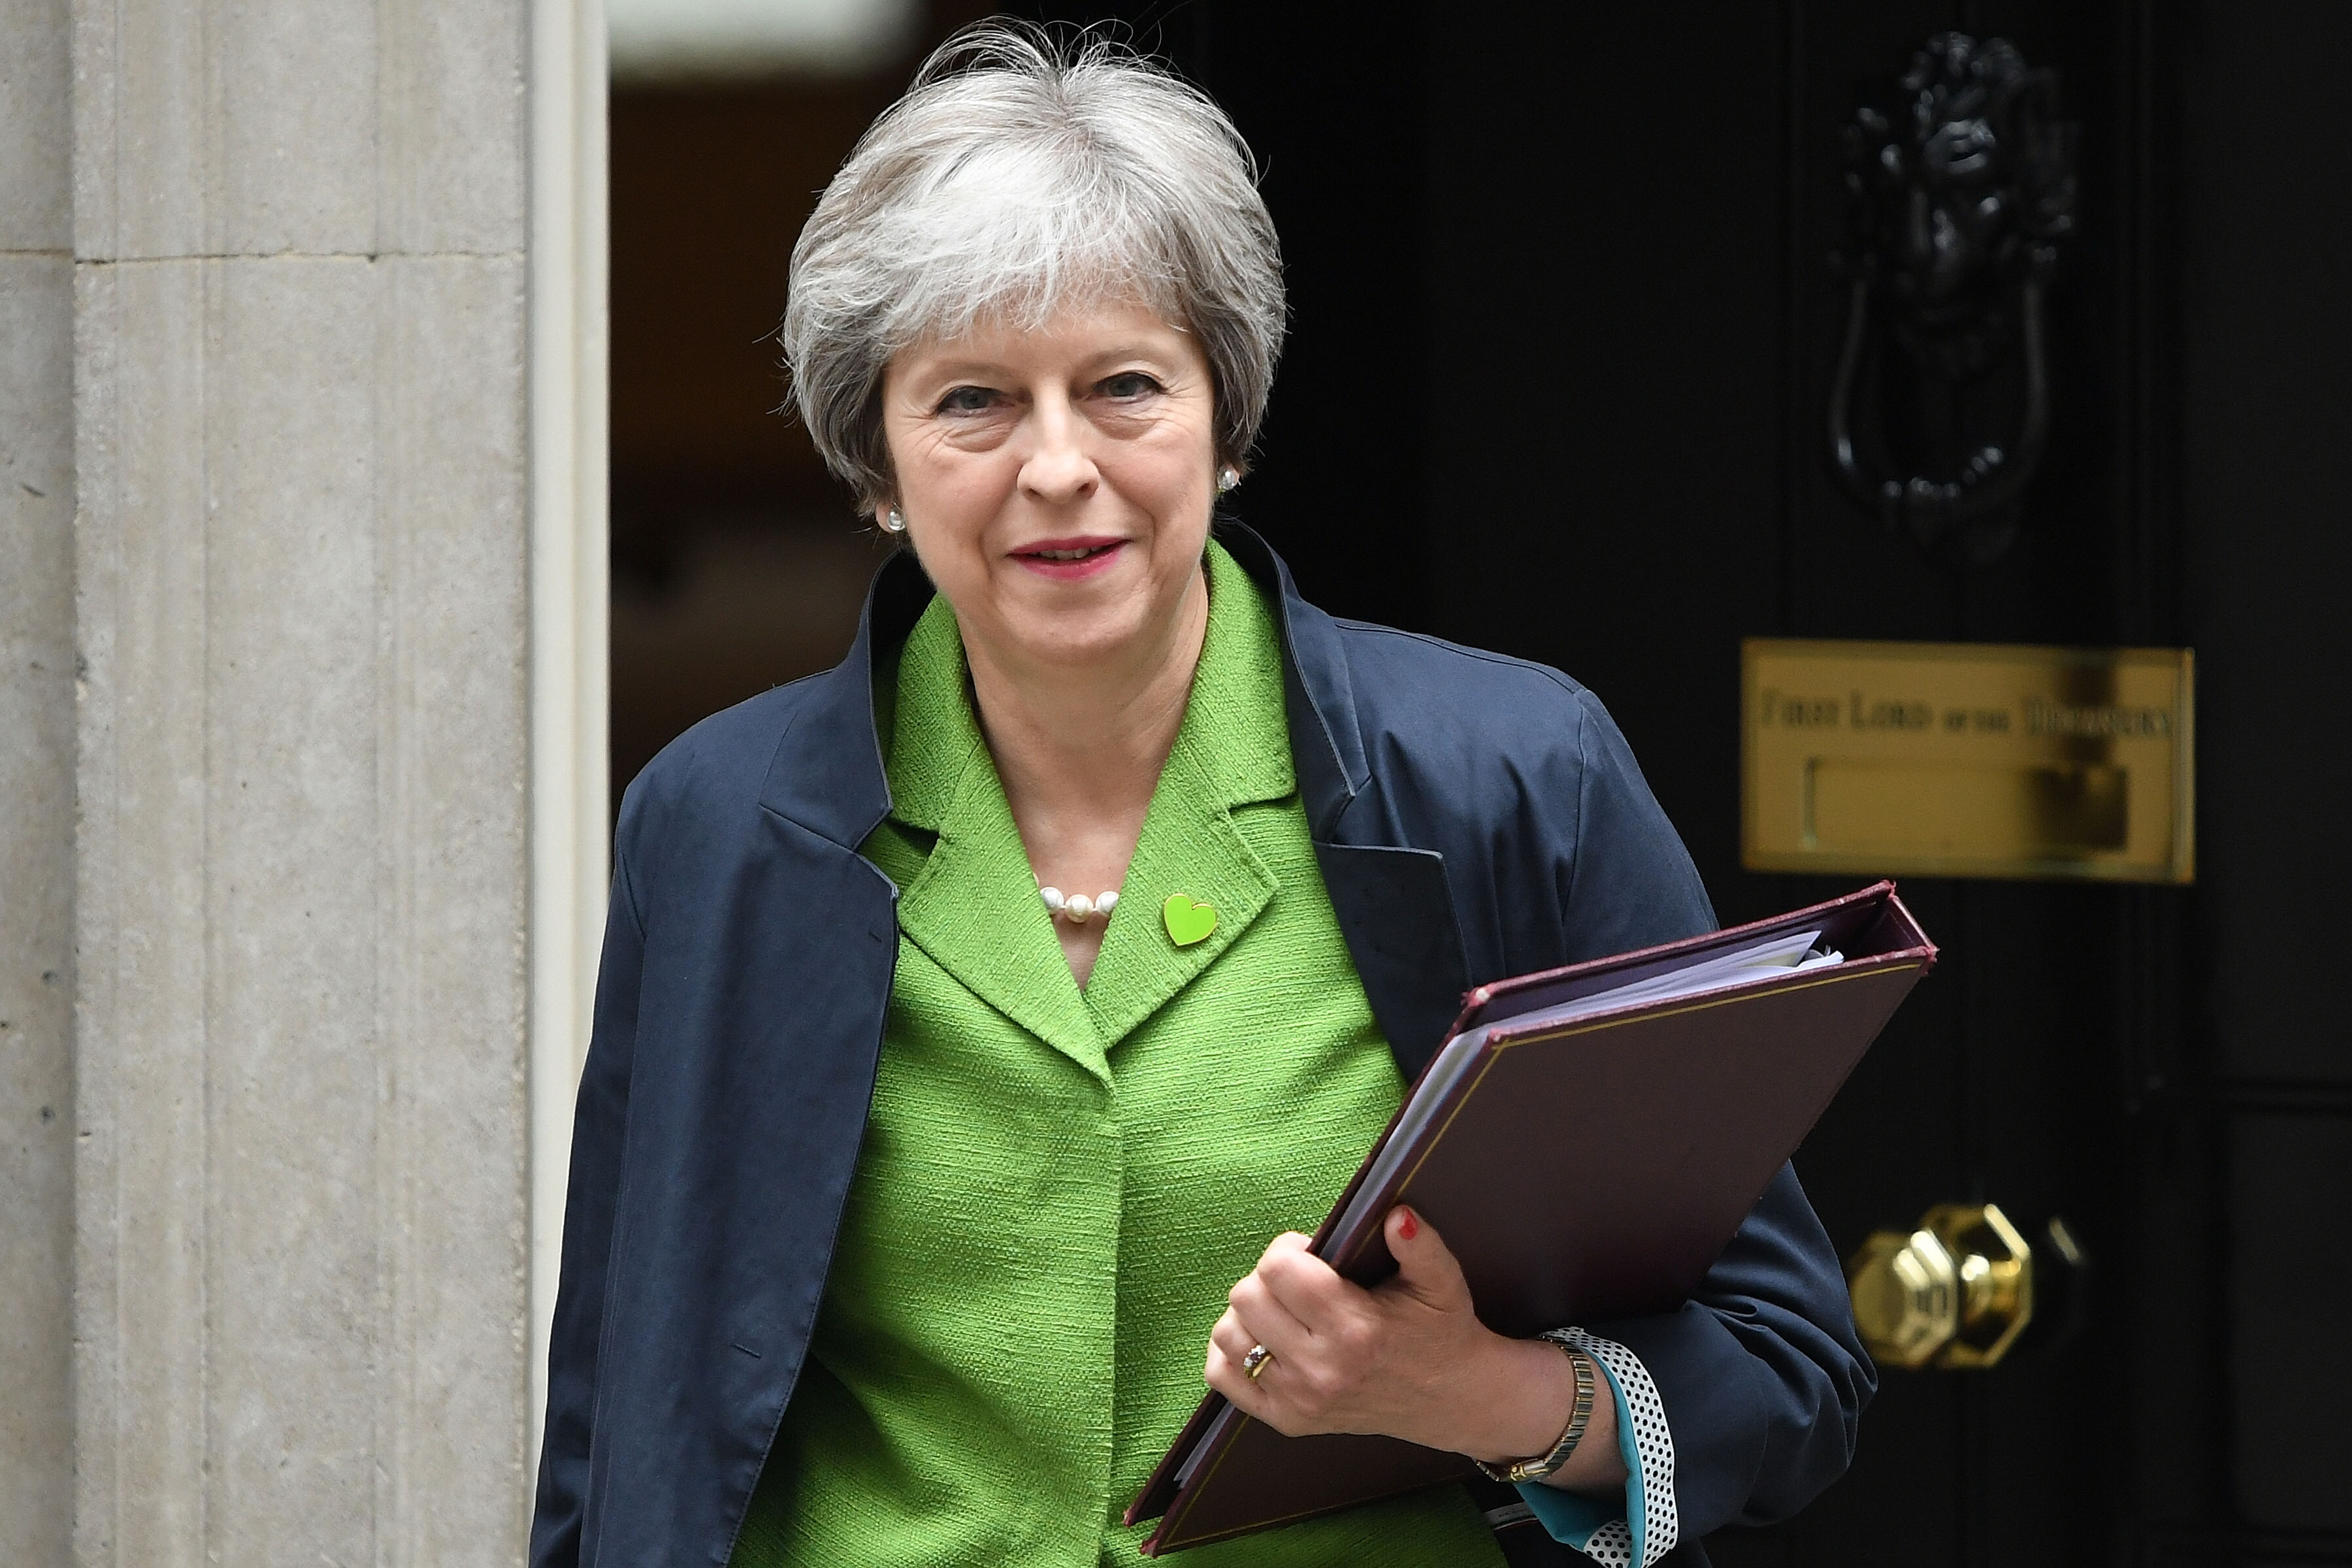 Prime Minister Theresa May leaves 10 Downing Street following a cabinet meeting on June 12, 2018 in London, England. (Chris J Ratcliffe – Getty Images)